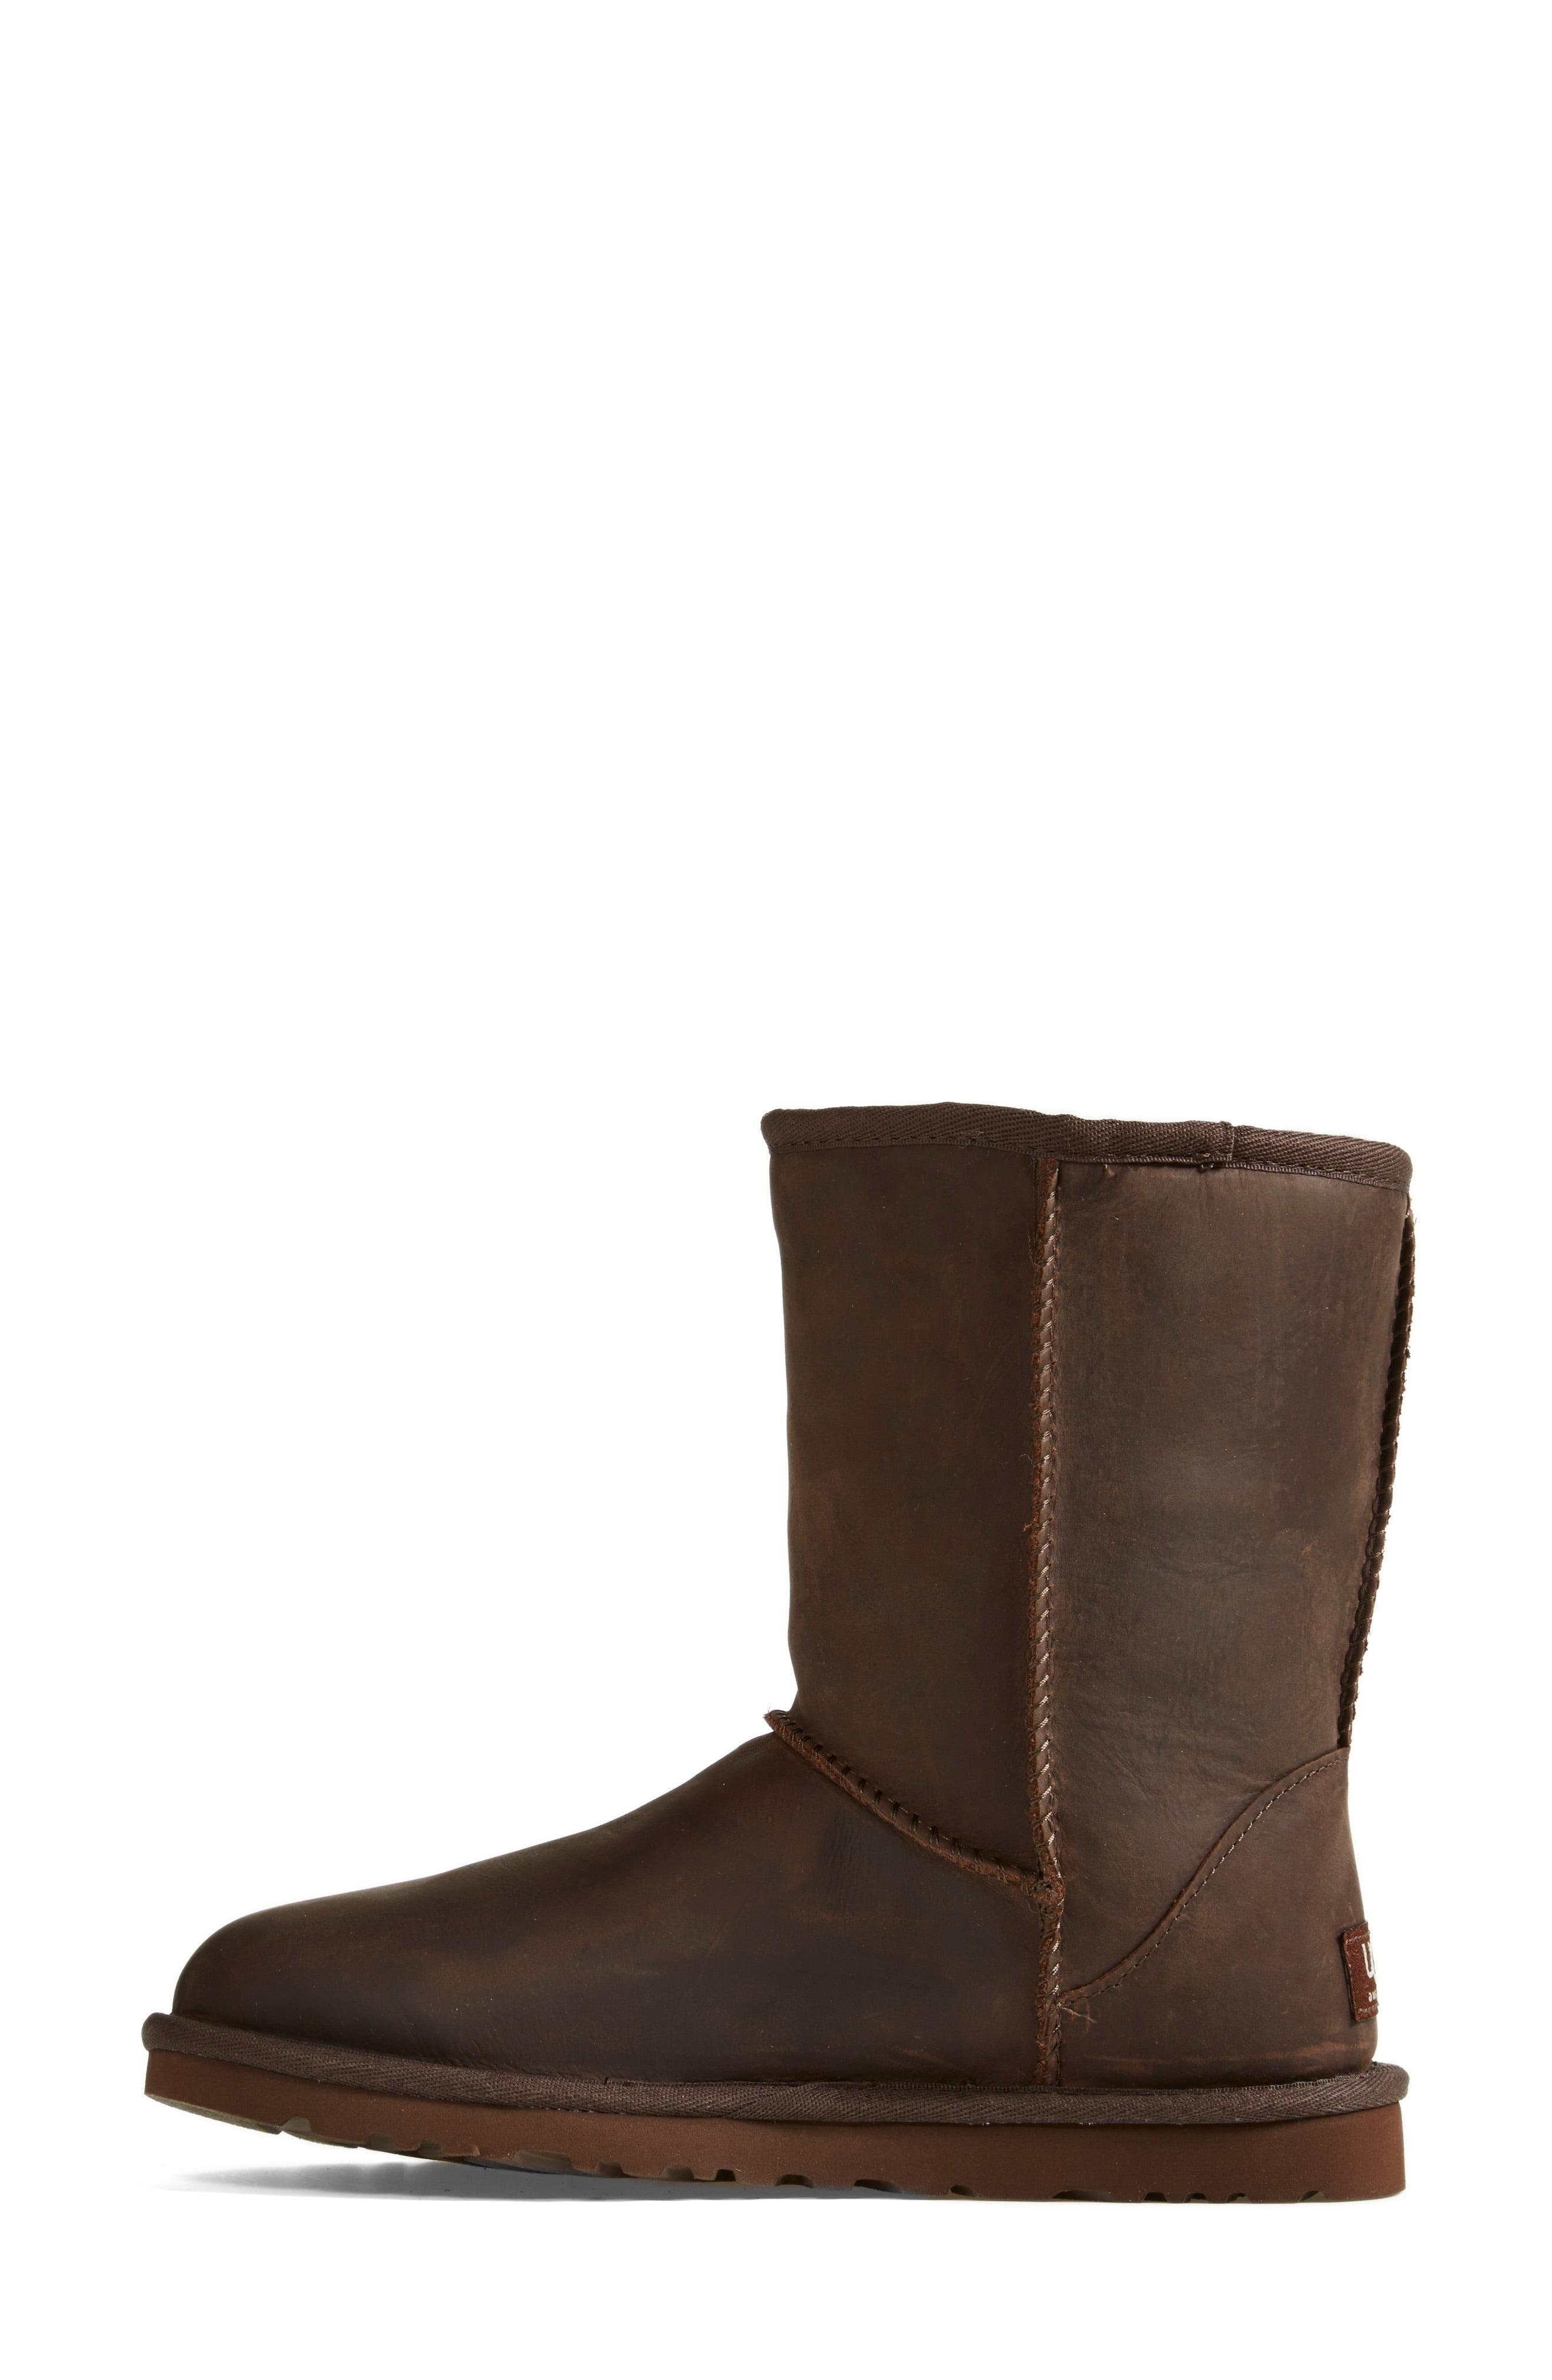 UGG Classic Short Wool Lined Leather Boot in Brown - Lyst